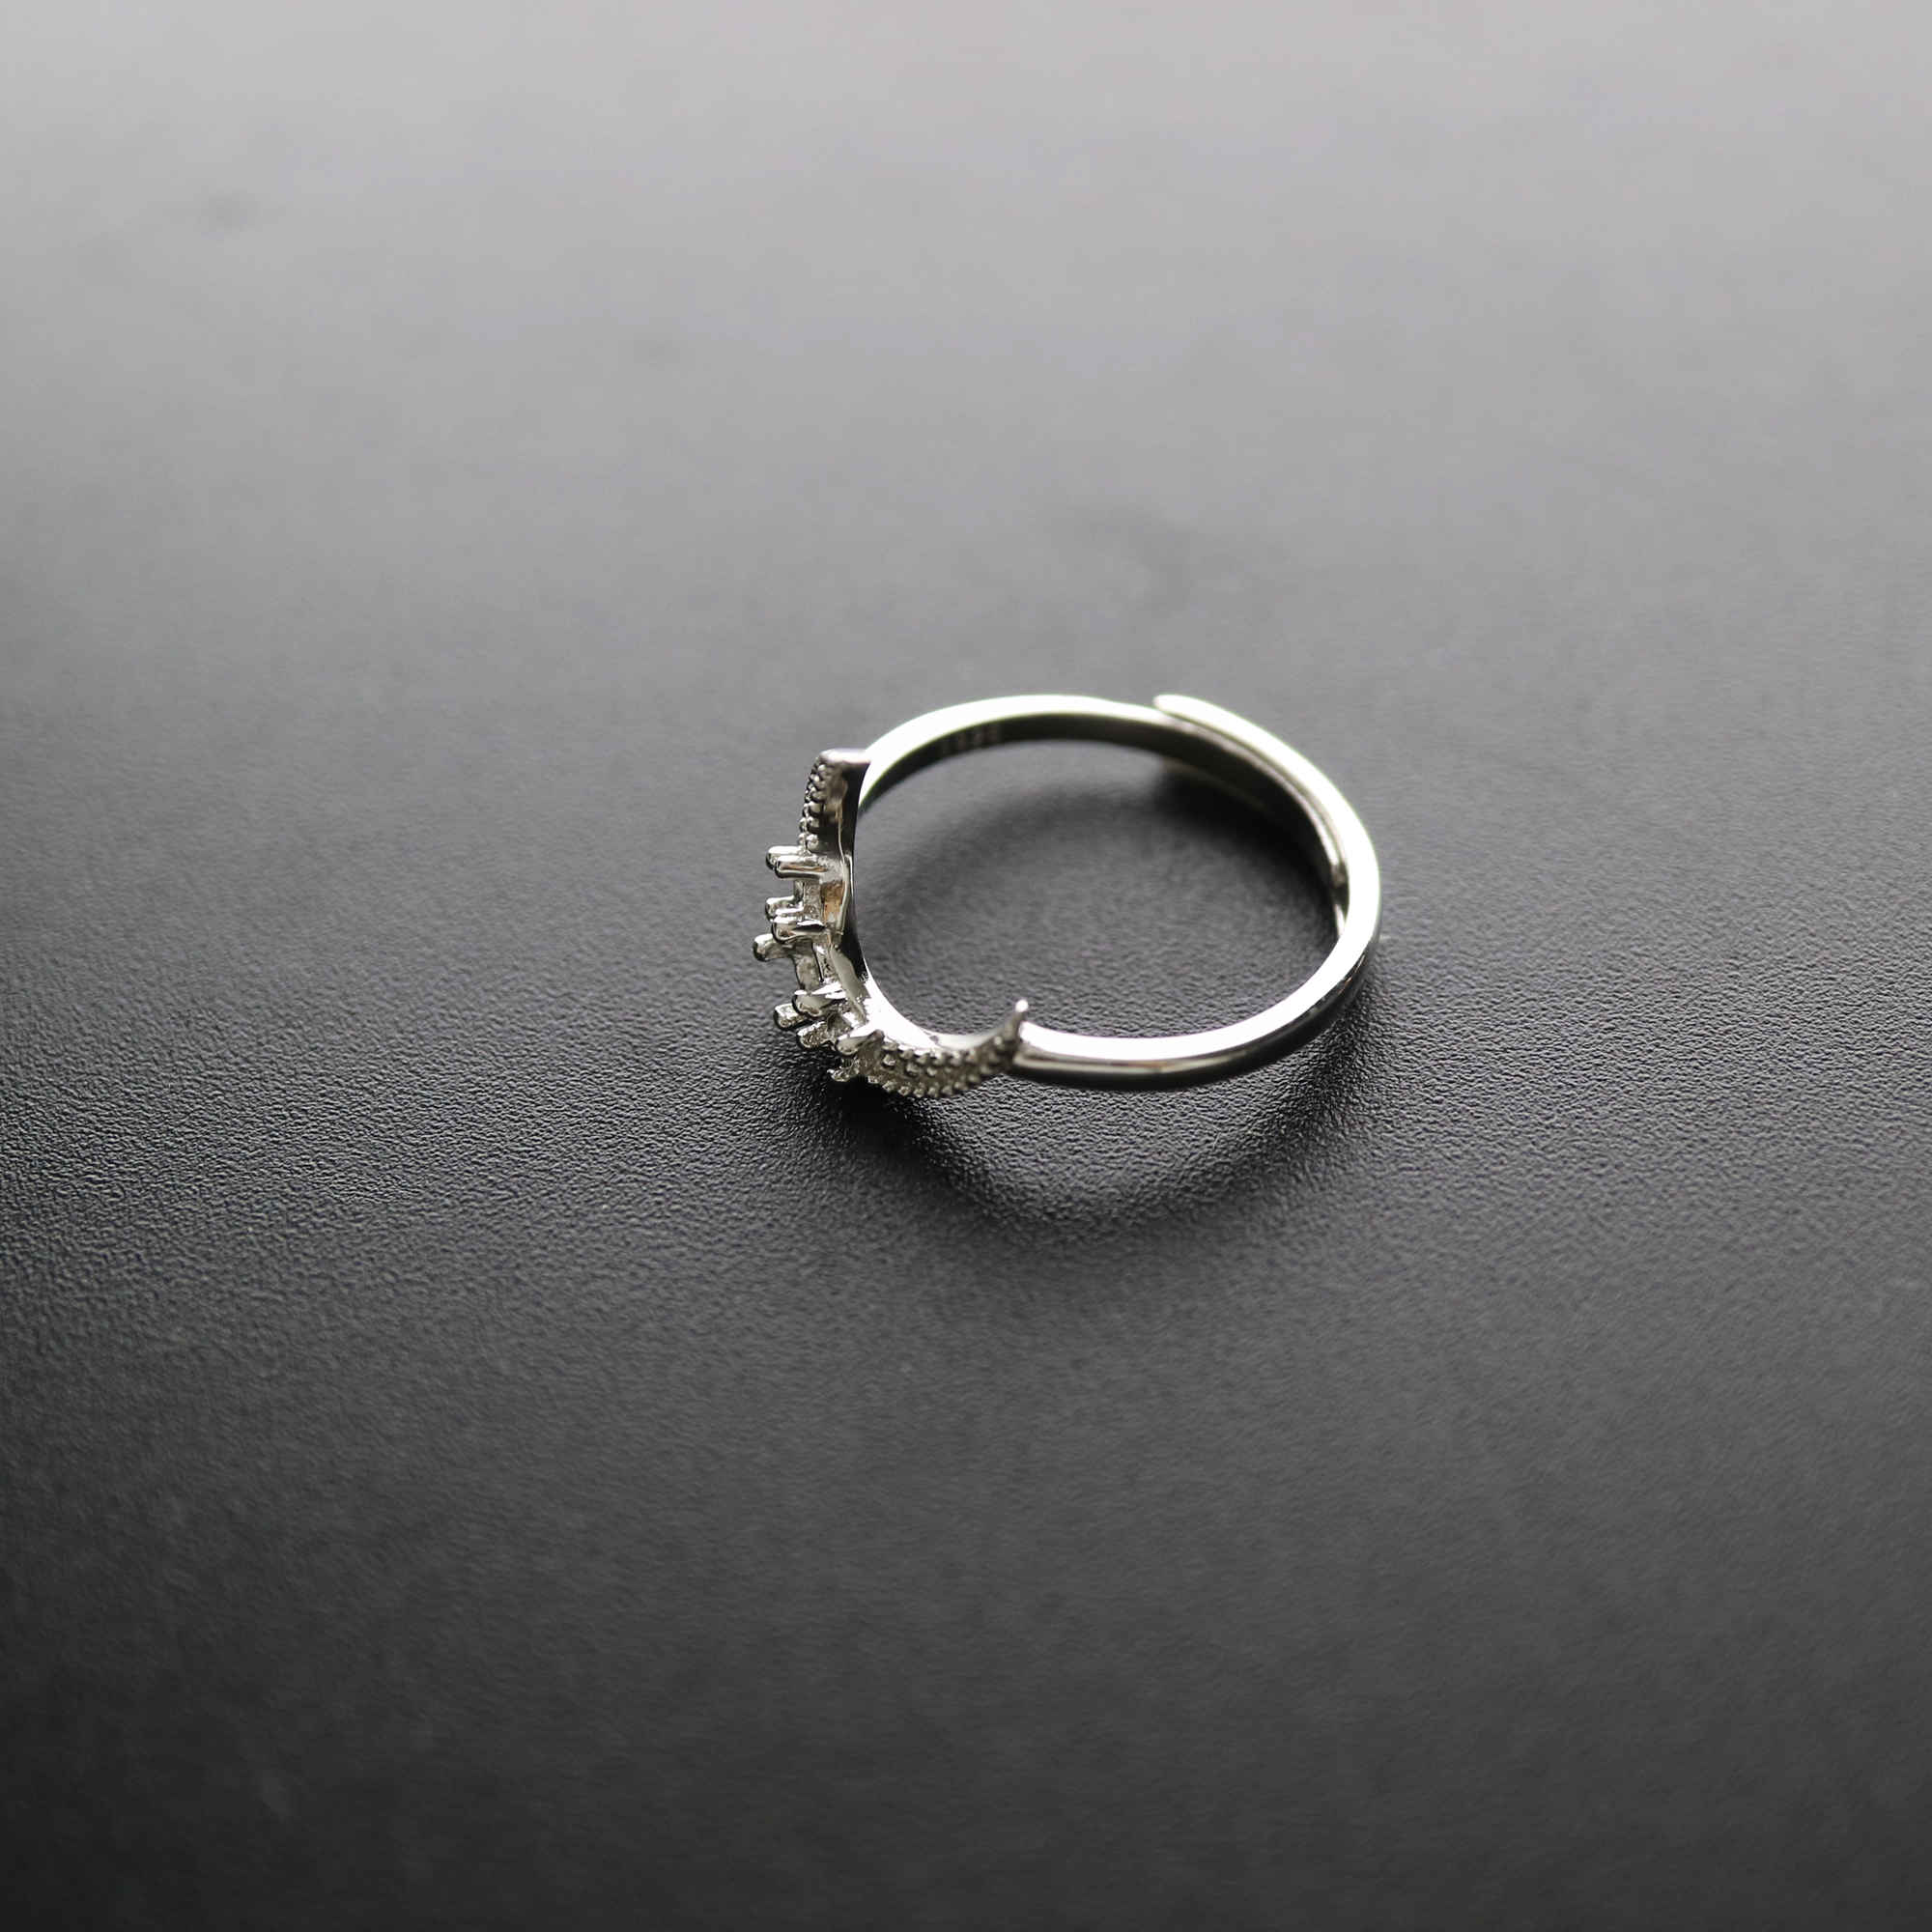 1Pcs 3MM Middle 2MM Two Sides Bezel Round Simple Rose Gold Silver Gemstone Cz Stone Prong Bezel Solid 925 Sterling Silver Adjustable Ring Settings Moon 1214035 - Click Image to Close